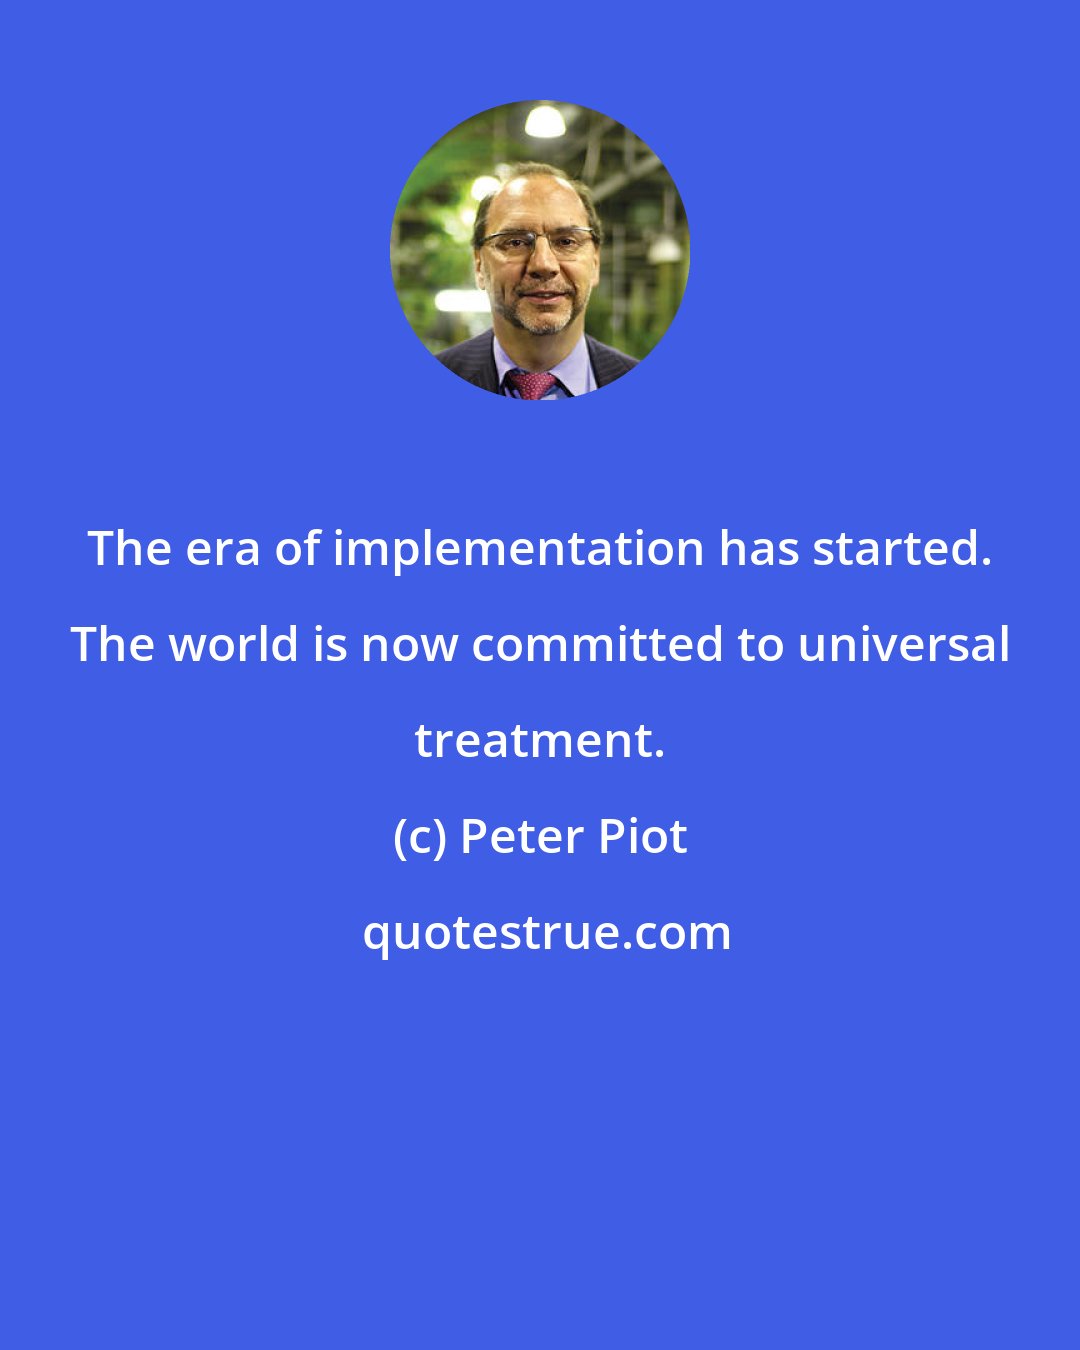 Peter Piot: The era of implementation has started. The world is now committed to universal treatment.